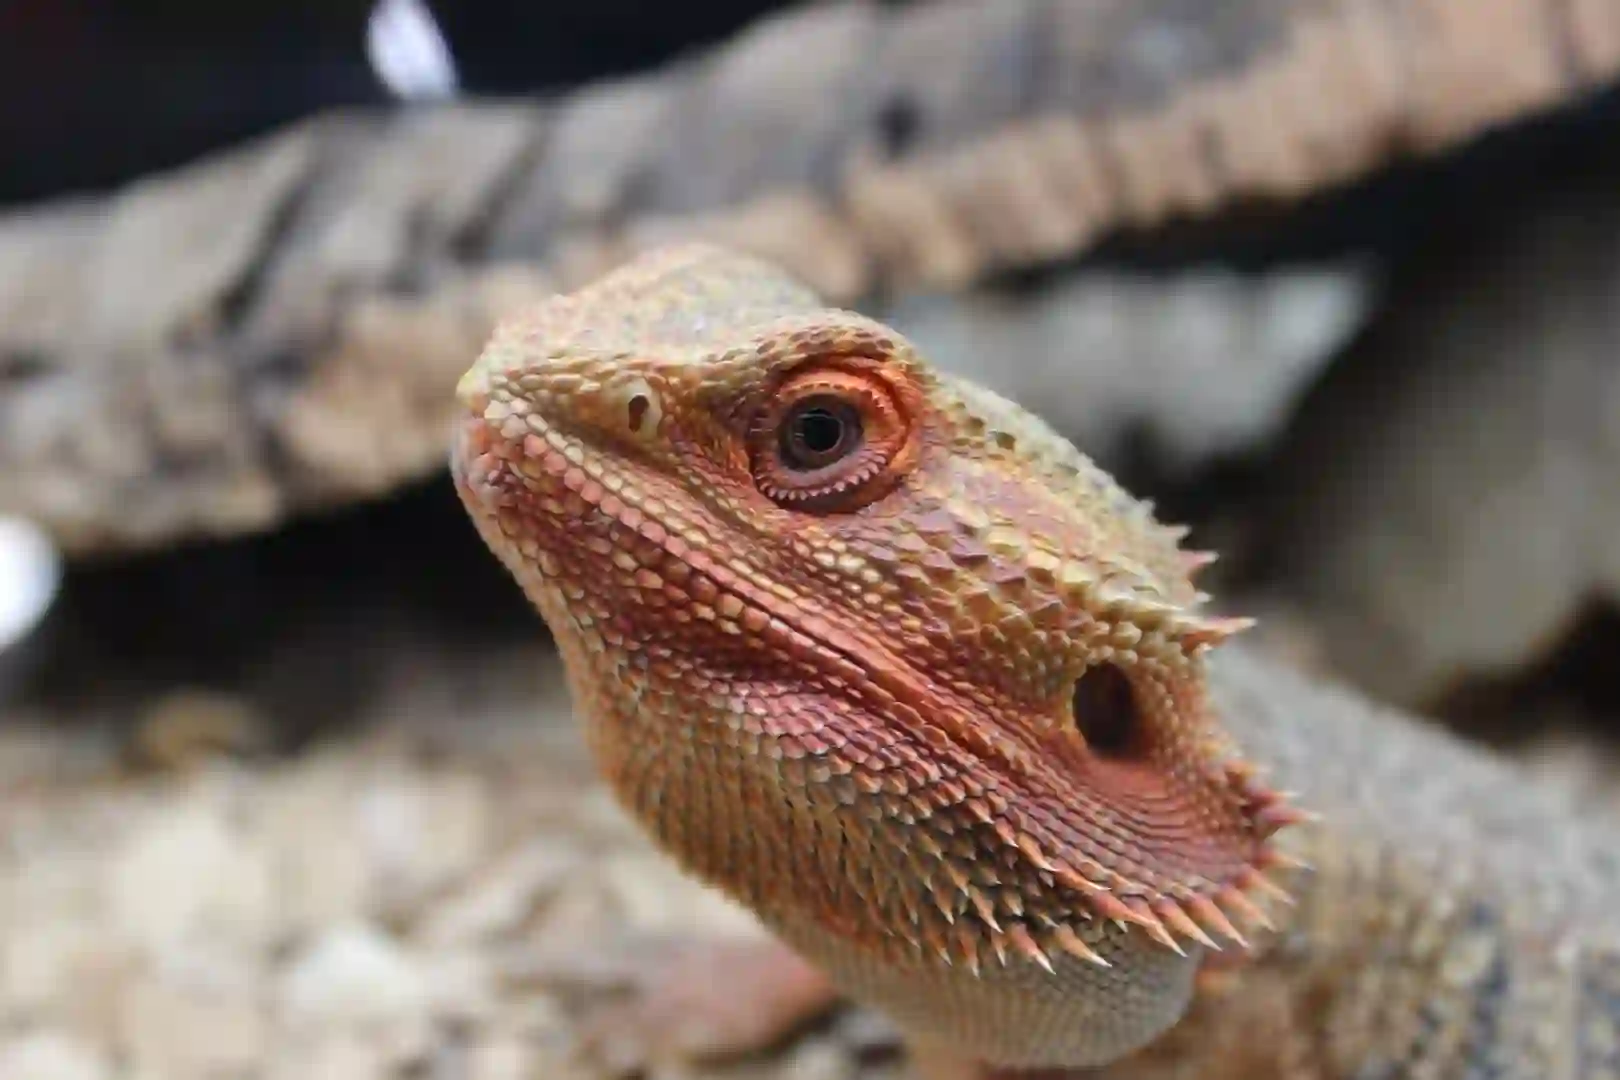 What Temperature Should A Bearded Dragon Tank Be At Night?